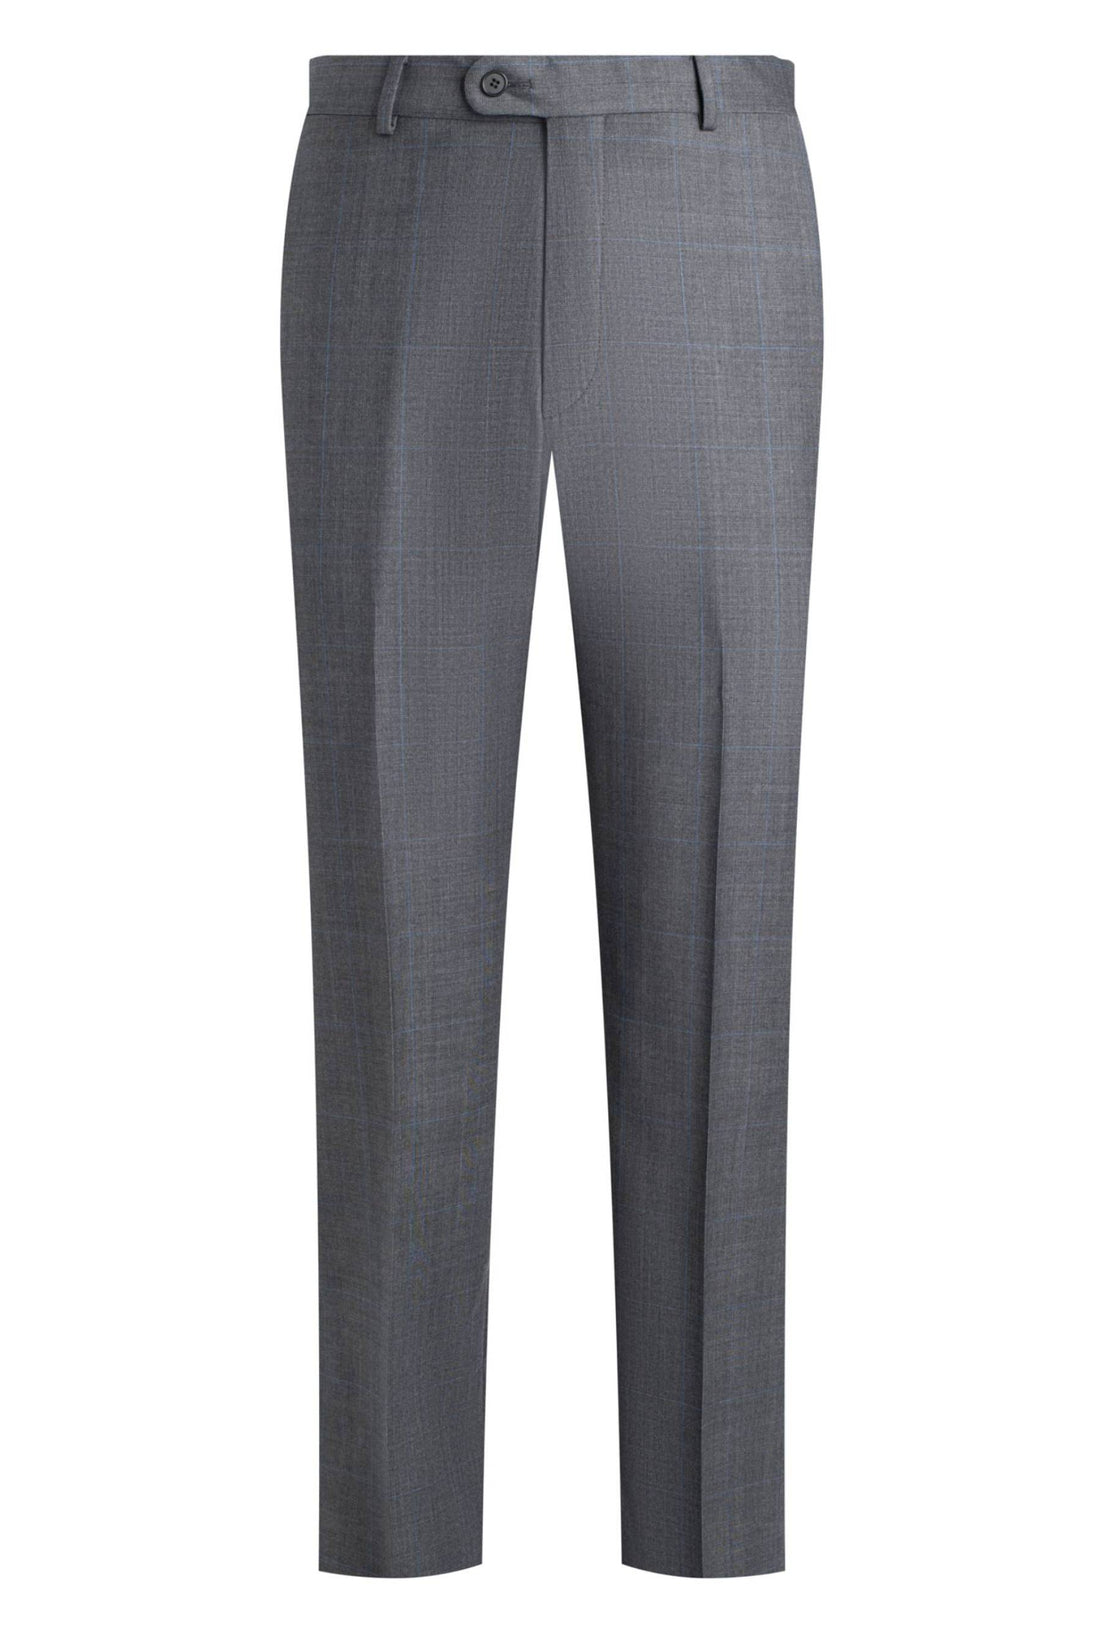 Heritage Gold Grey 130'S Plaid with Blue Overcheck Suit Front Pant